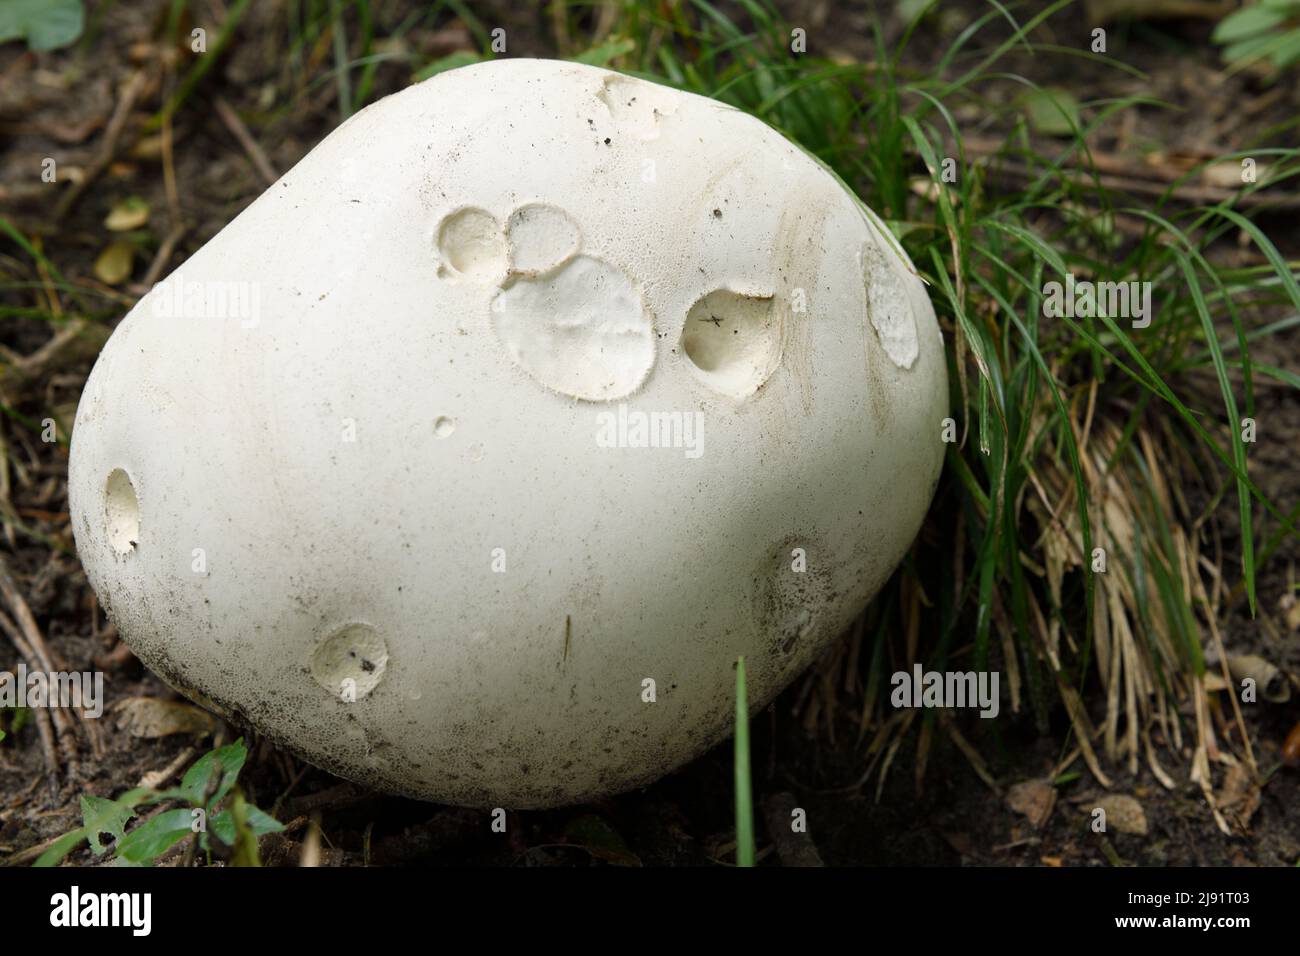 Large 11 inch diameter white giant puffball Calvatia Gigantea growing on forest floor in the Fall Stock Photo